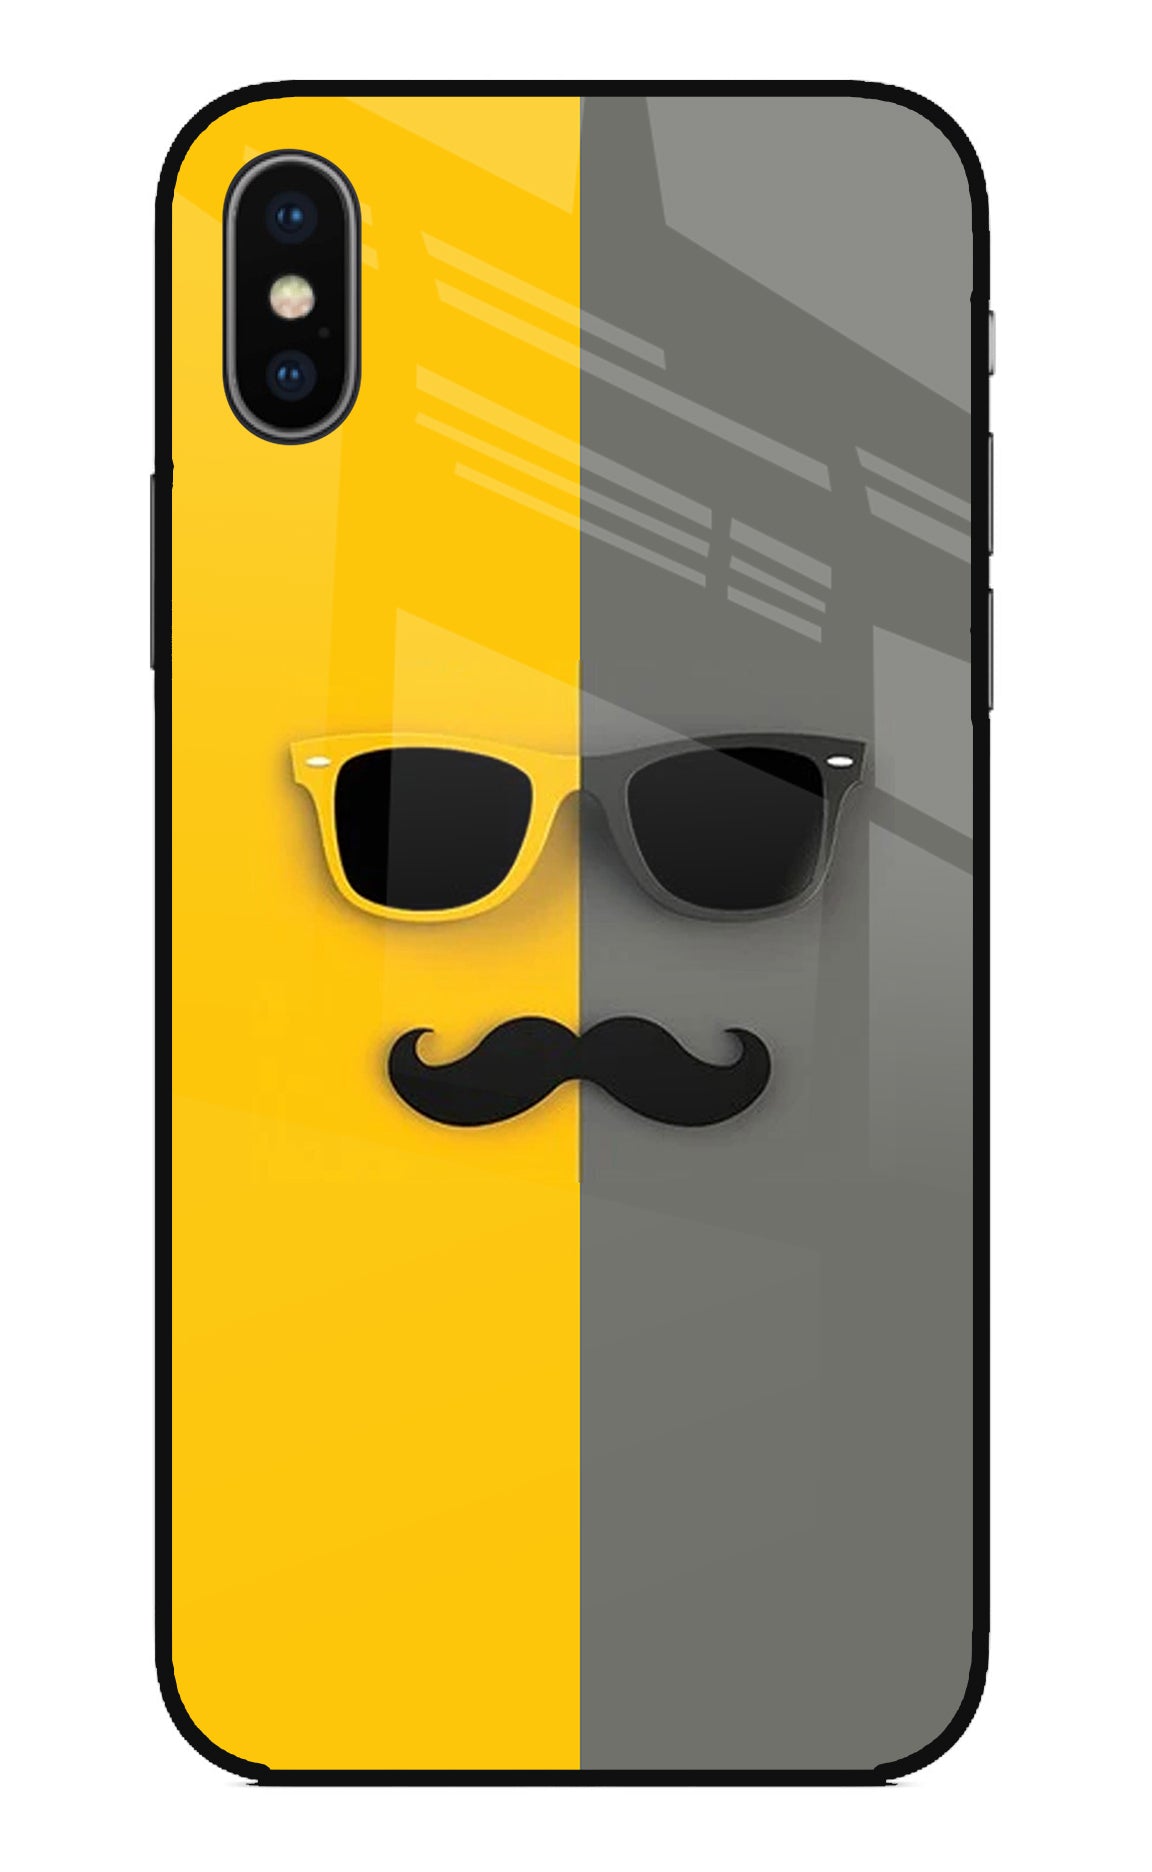 Sunglasses with Mustache iPhone X Back Cover